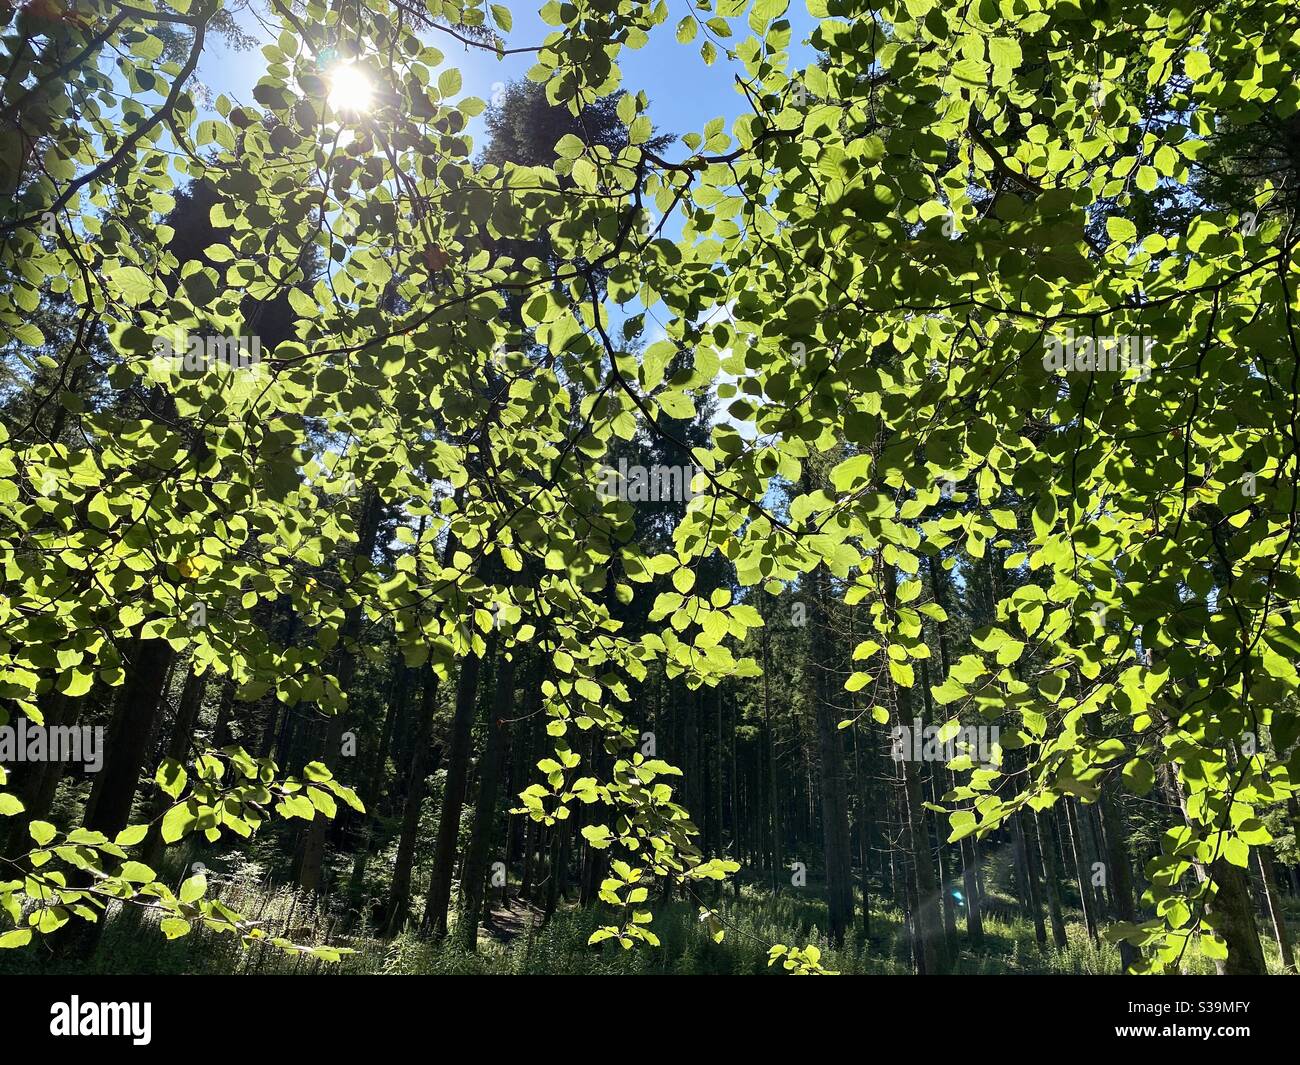 Leaves on a tree in a forest back lit by sunlight Stock Photo